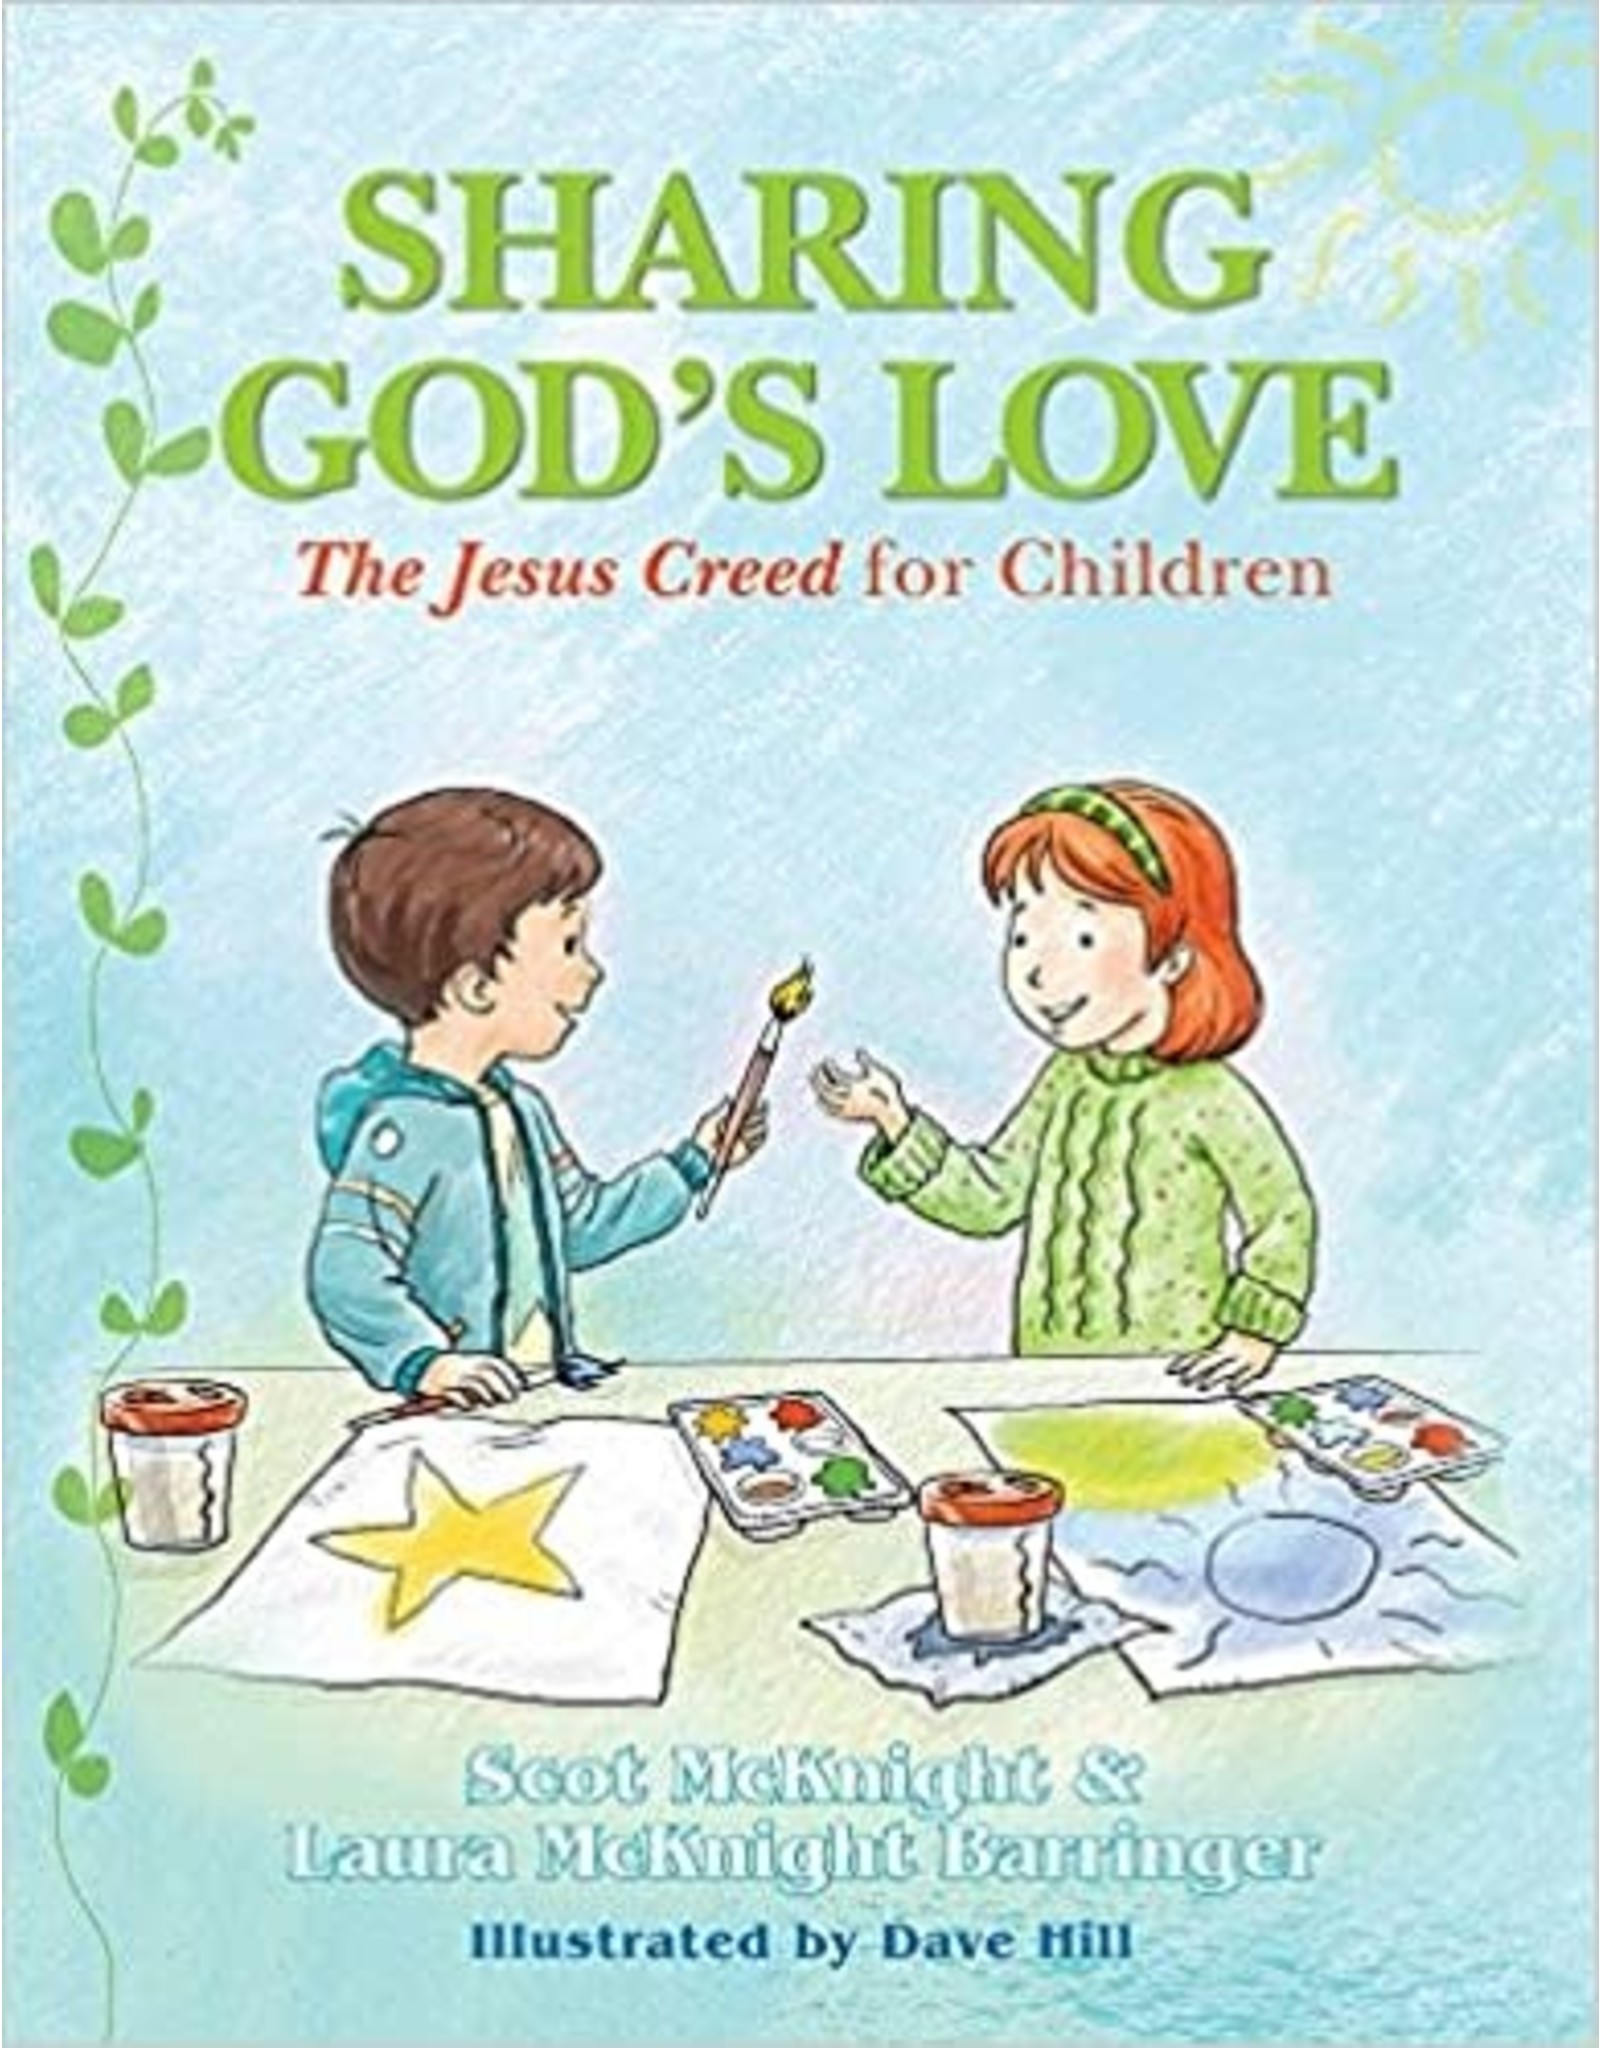 Paraclete Press Sharing God's Love: The Jesus Creed for Children by Scot McKnight & Laura McKnight Barringer